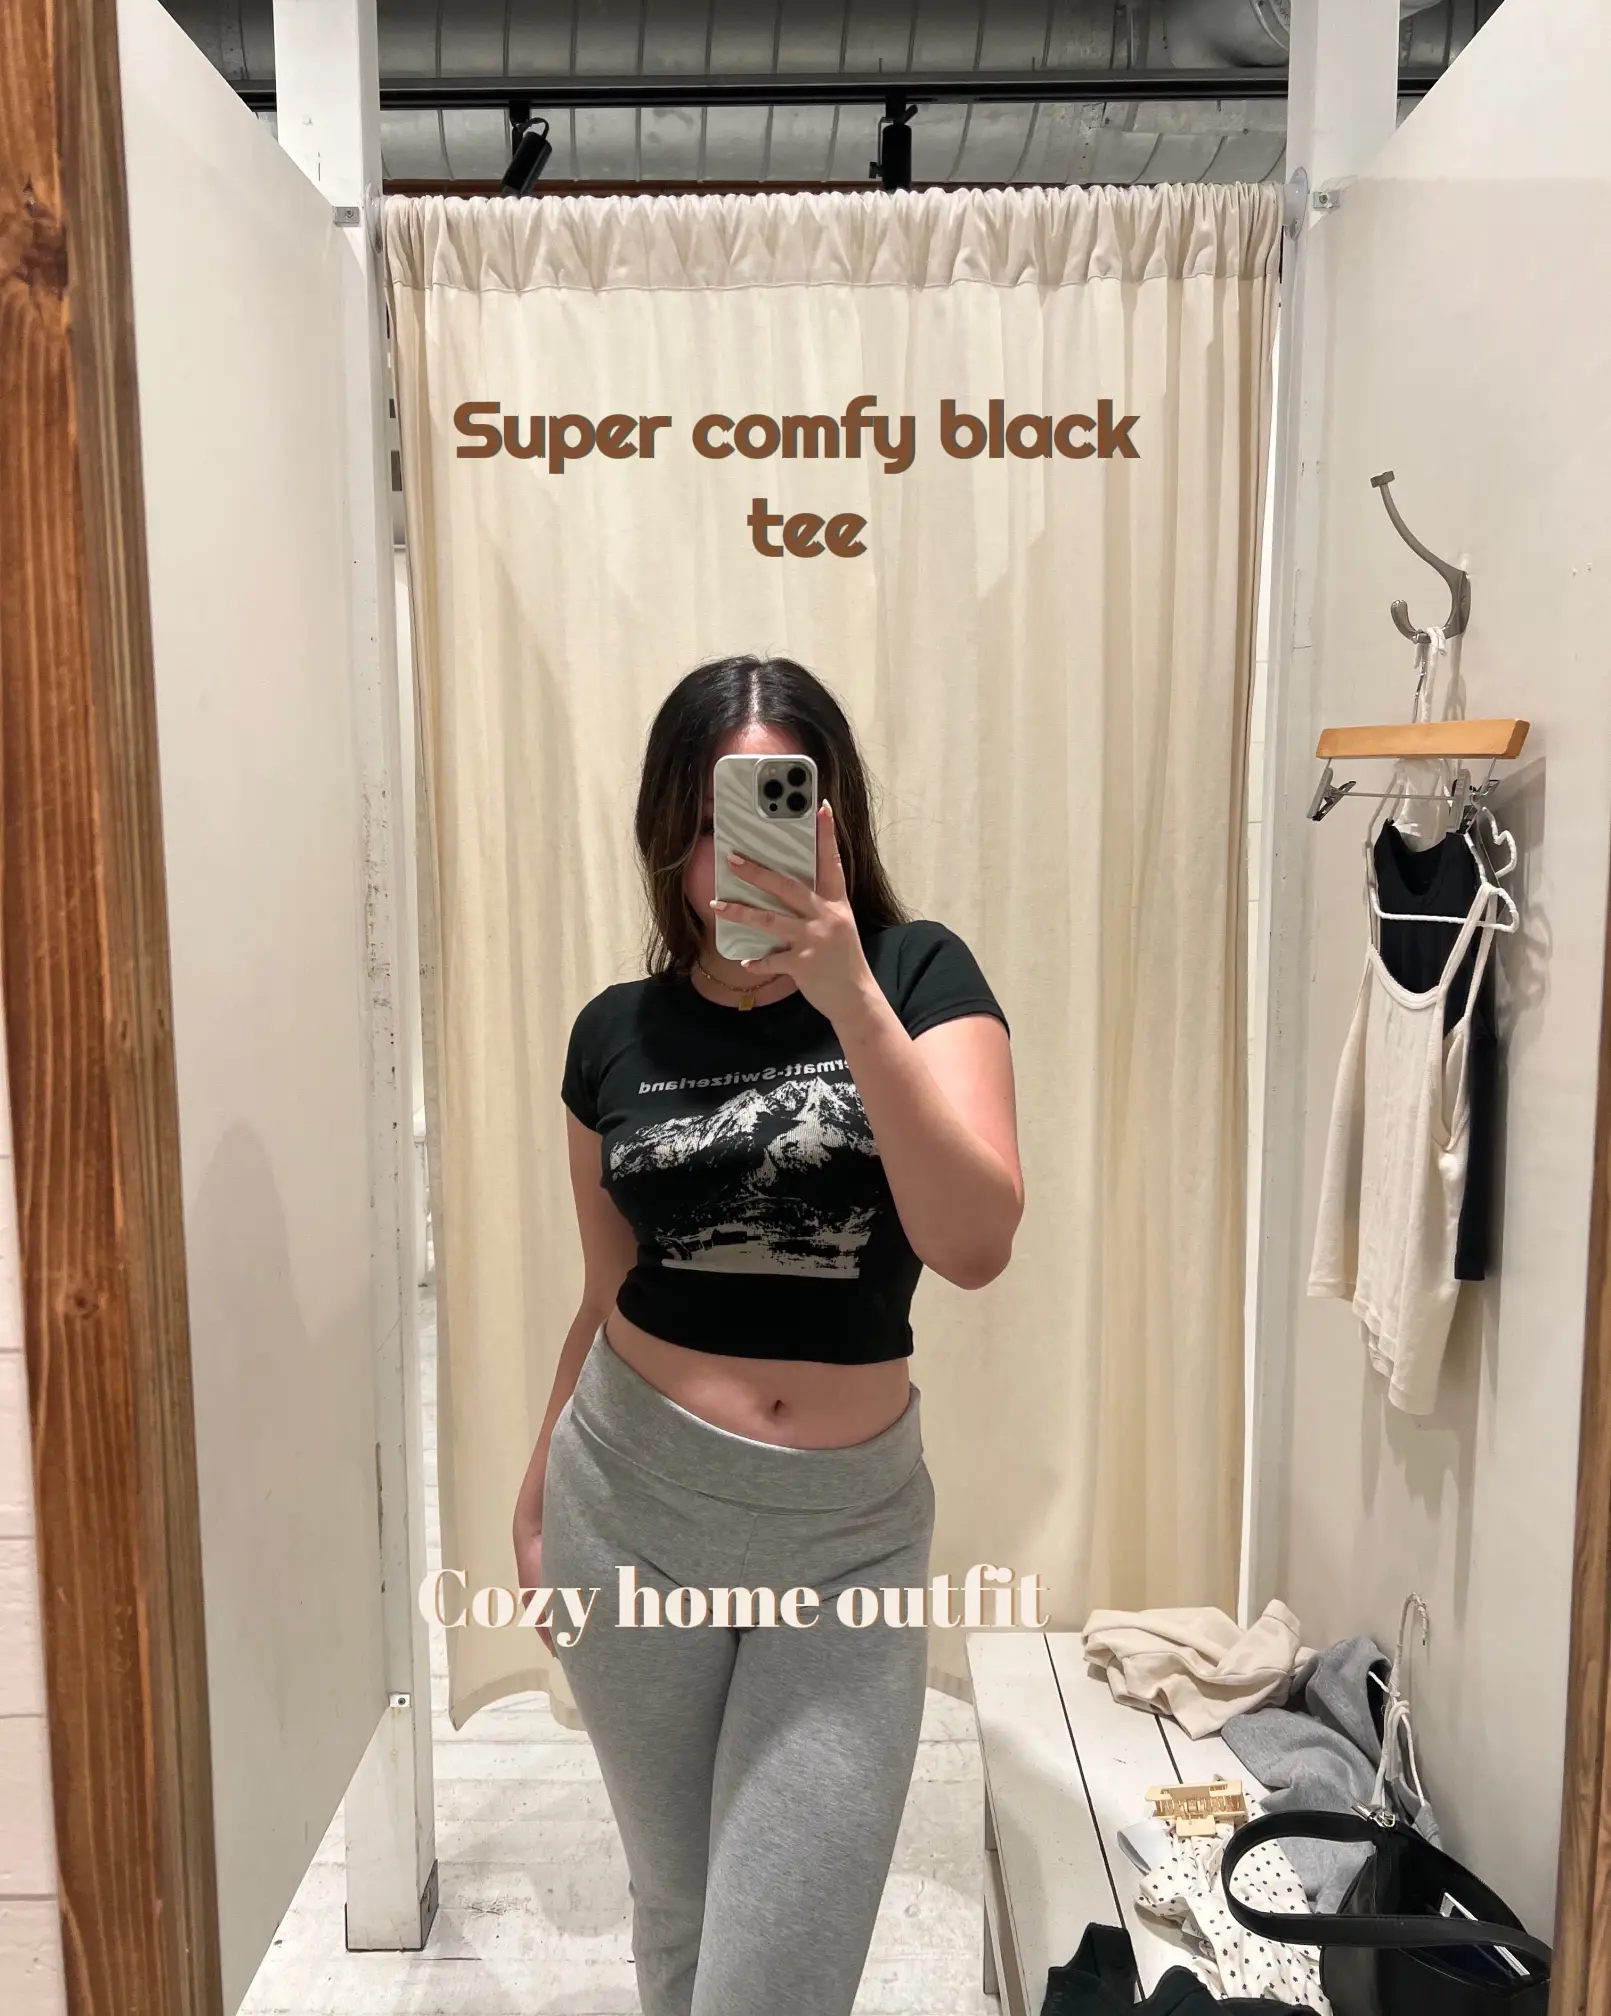 all my brandy melville tops, Gallery posted by Lemon8er